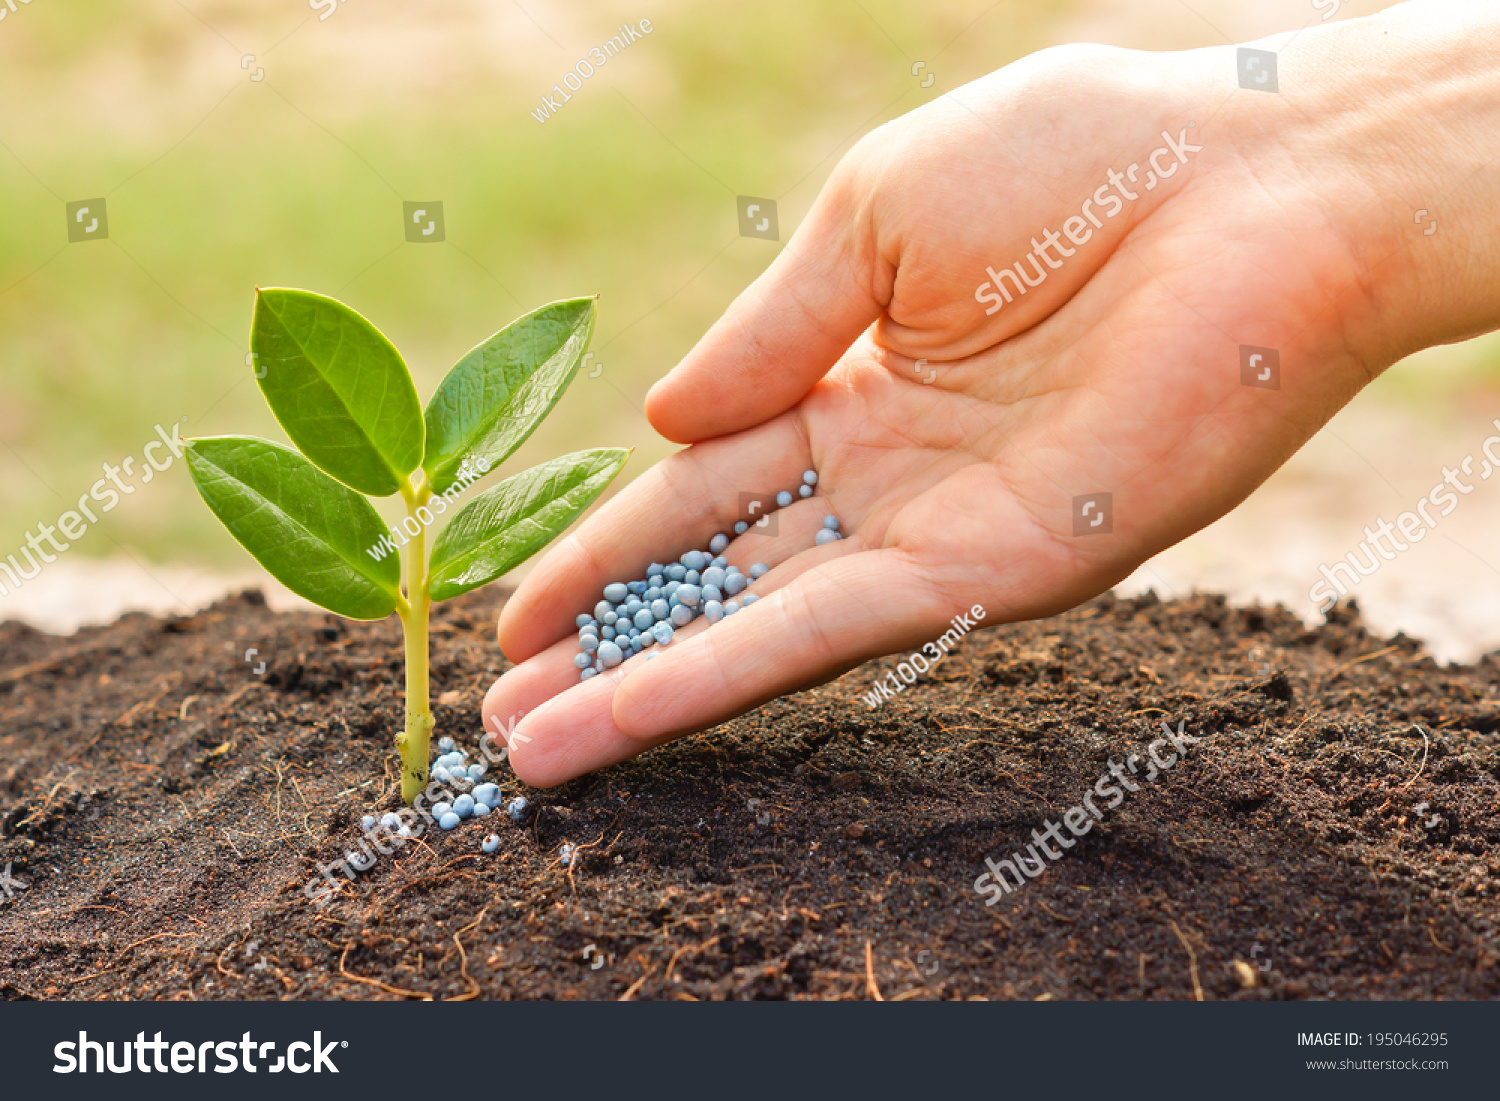 stock-photo-a-hand-giving-fertilizer-to-a-young-plant-with-warm-sunlight-planting-tree-195046295.jpg